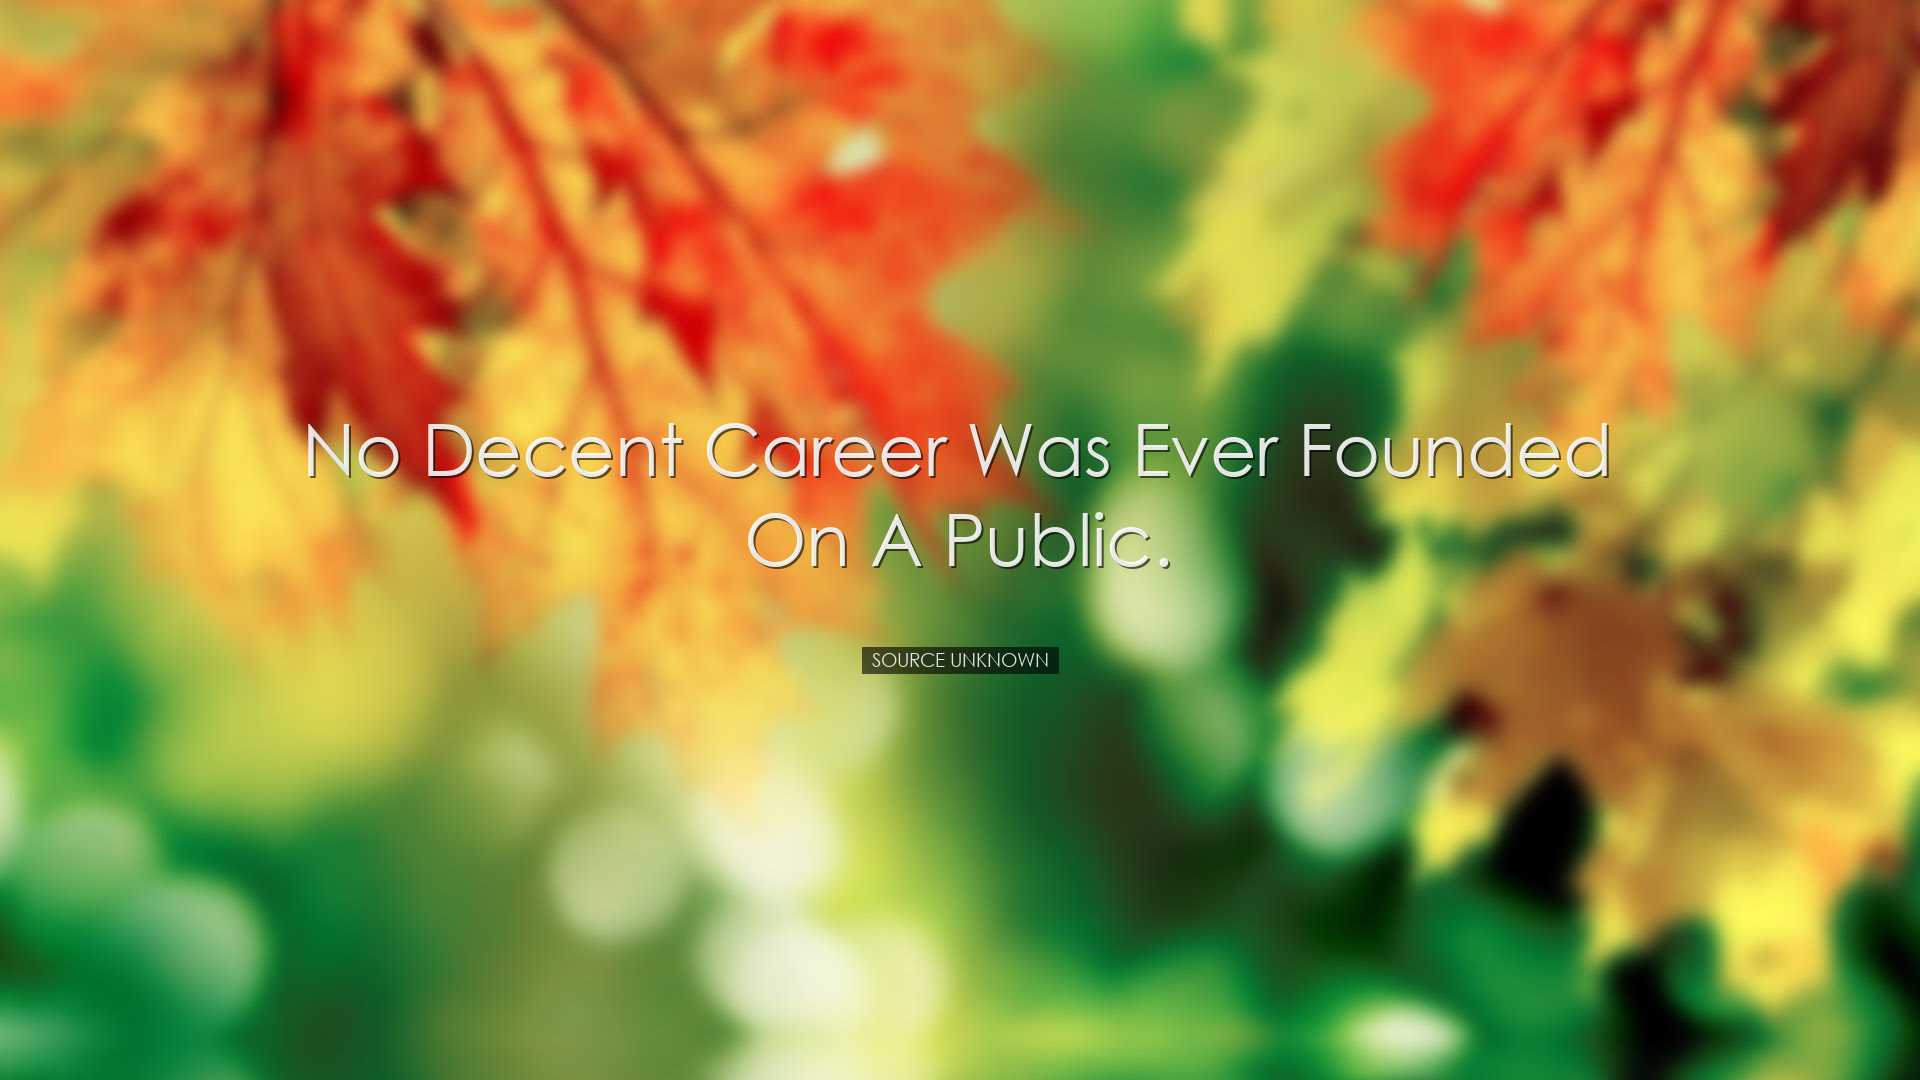 No decent career was ever founded on a public. - Source Unknown